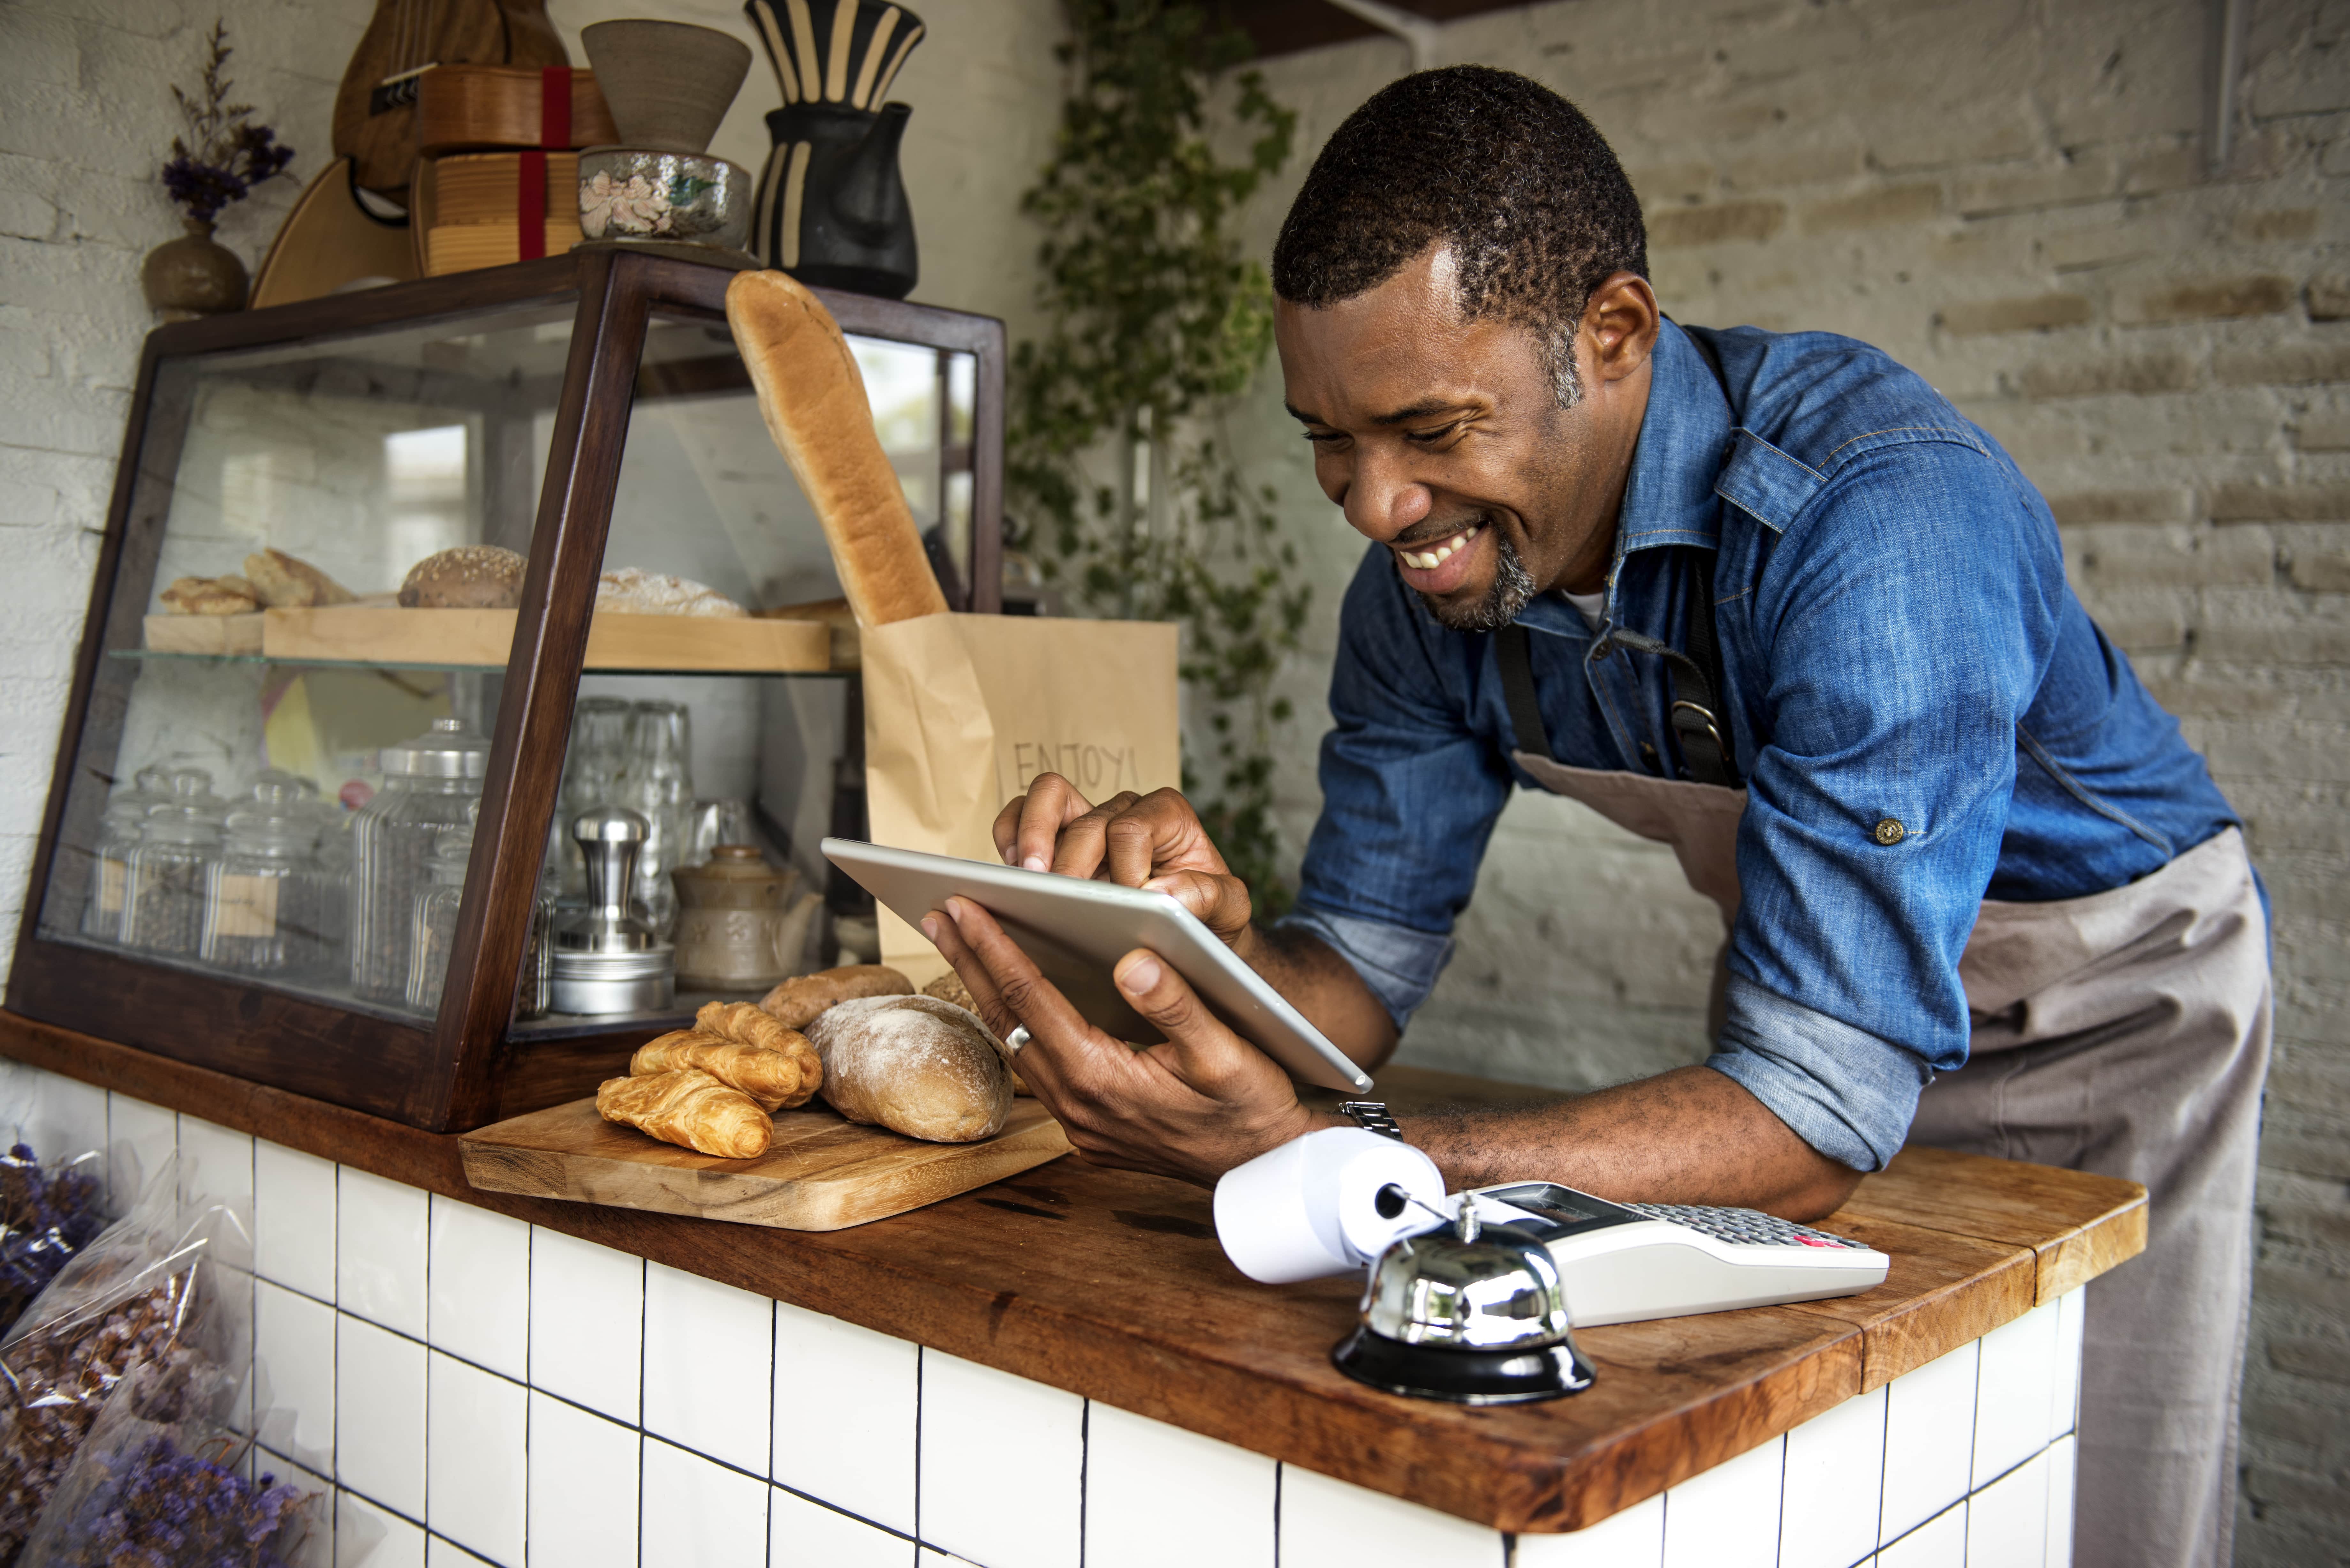 Bakery, Ipad, owner, bread, business